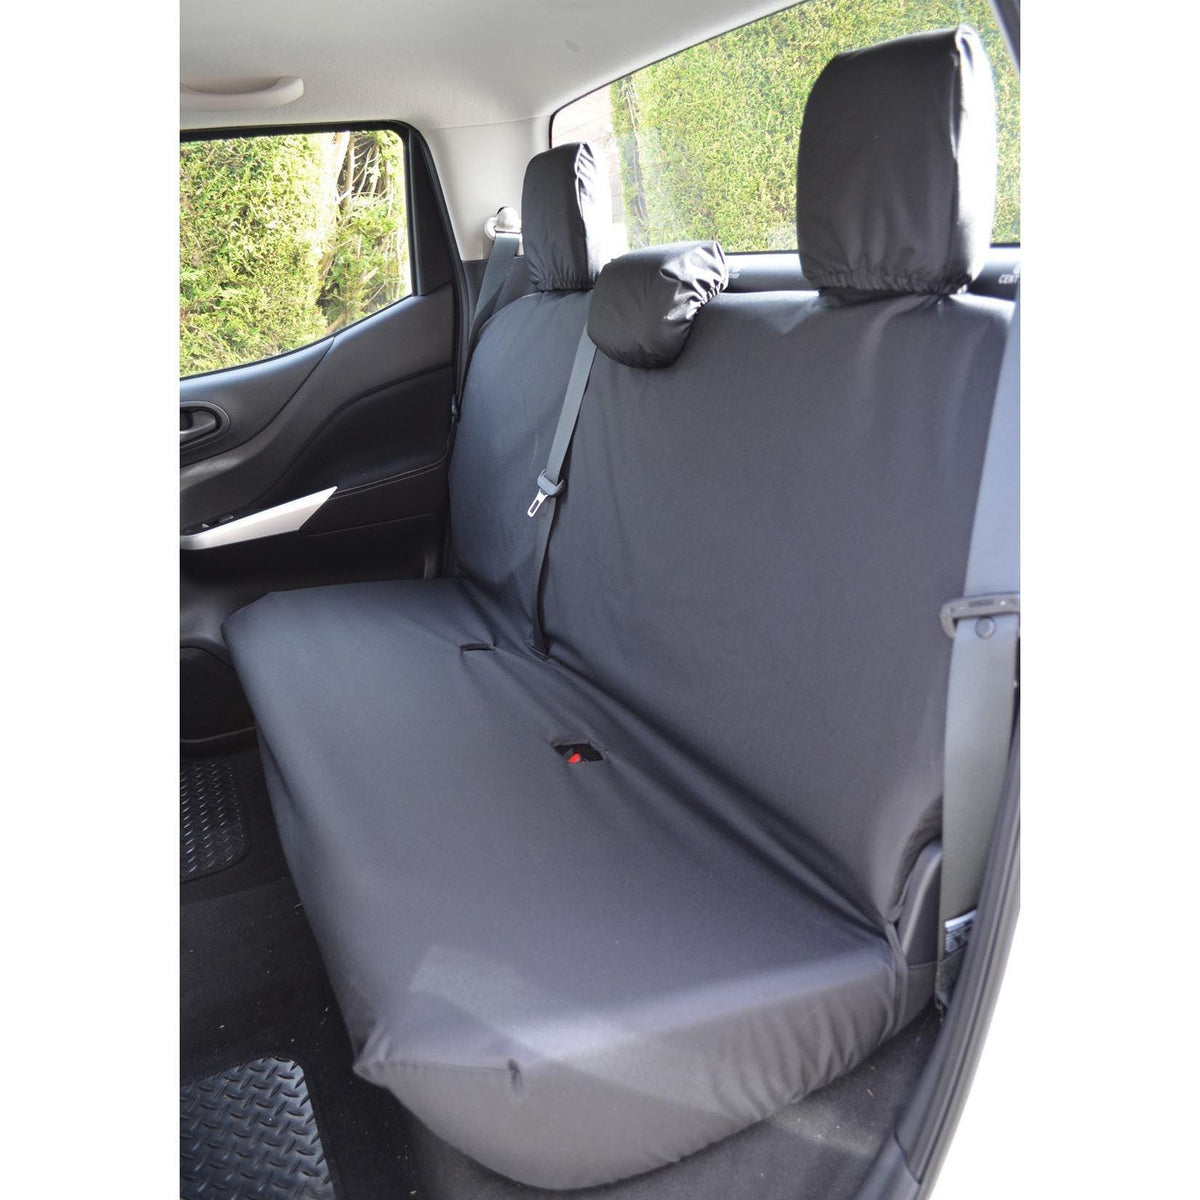 MERCEDES X-CLASS 2017 ON DOUBLE CAB REAR SEAT COVERS - BLACK - Storm Xccessories2